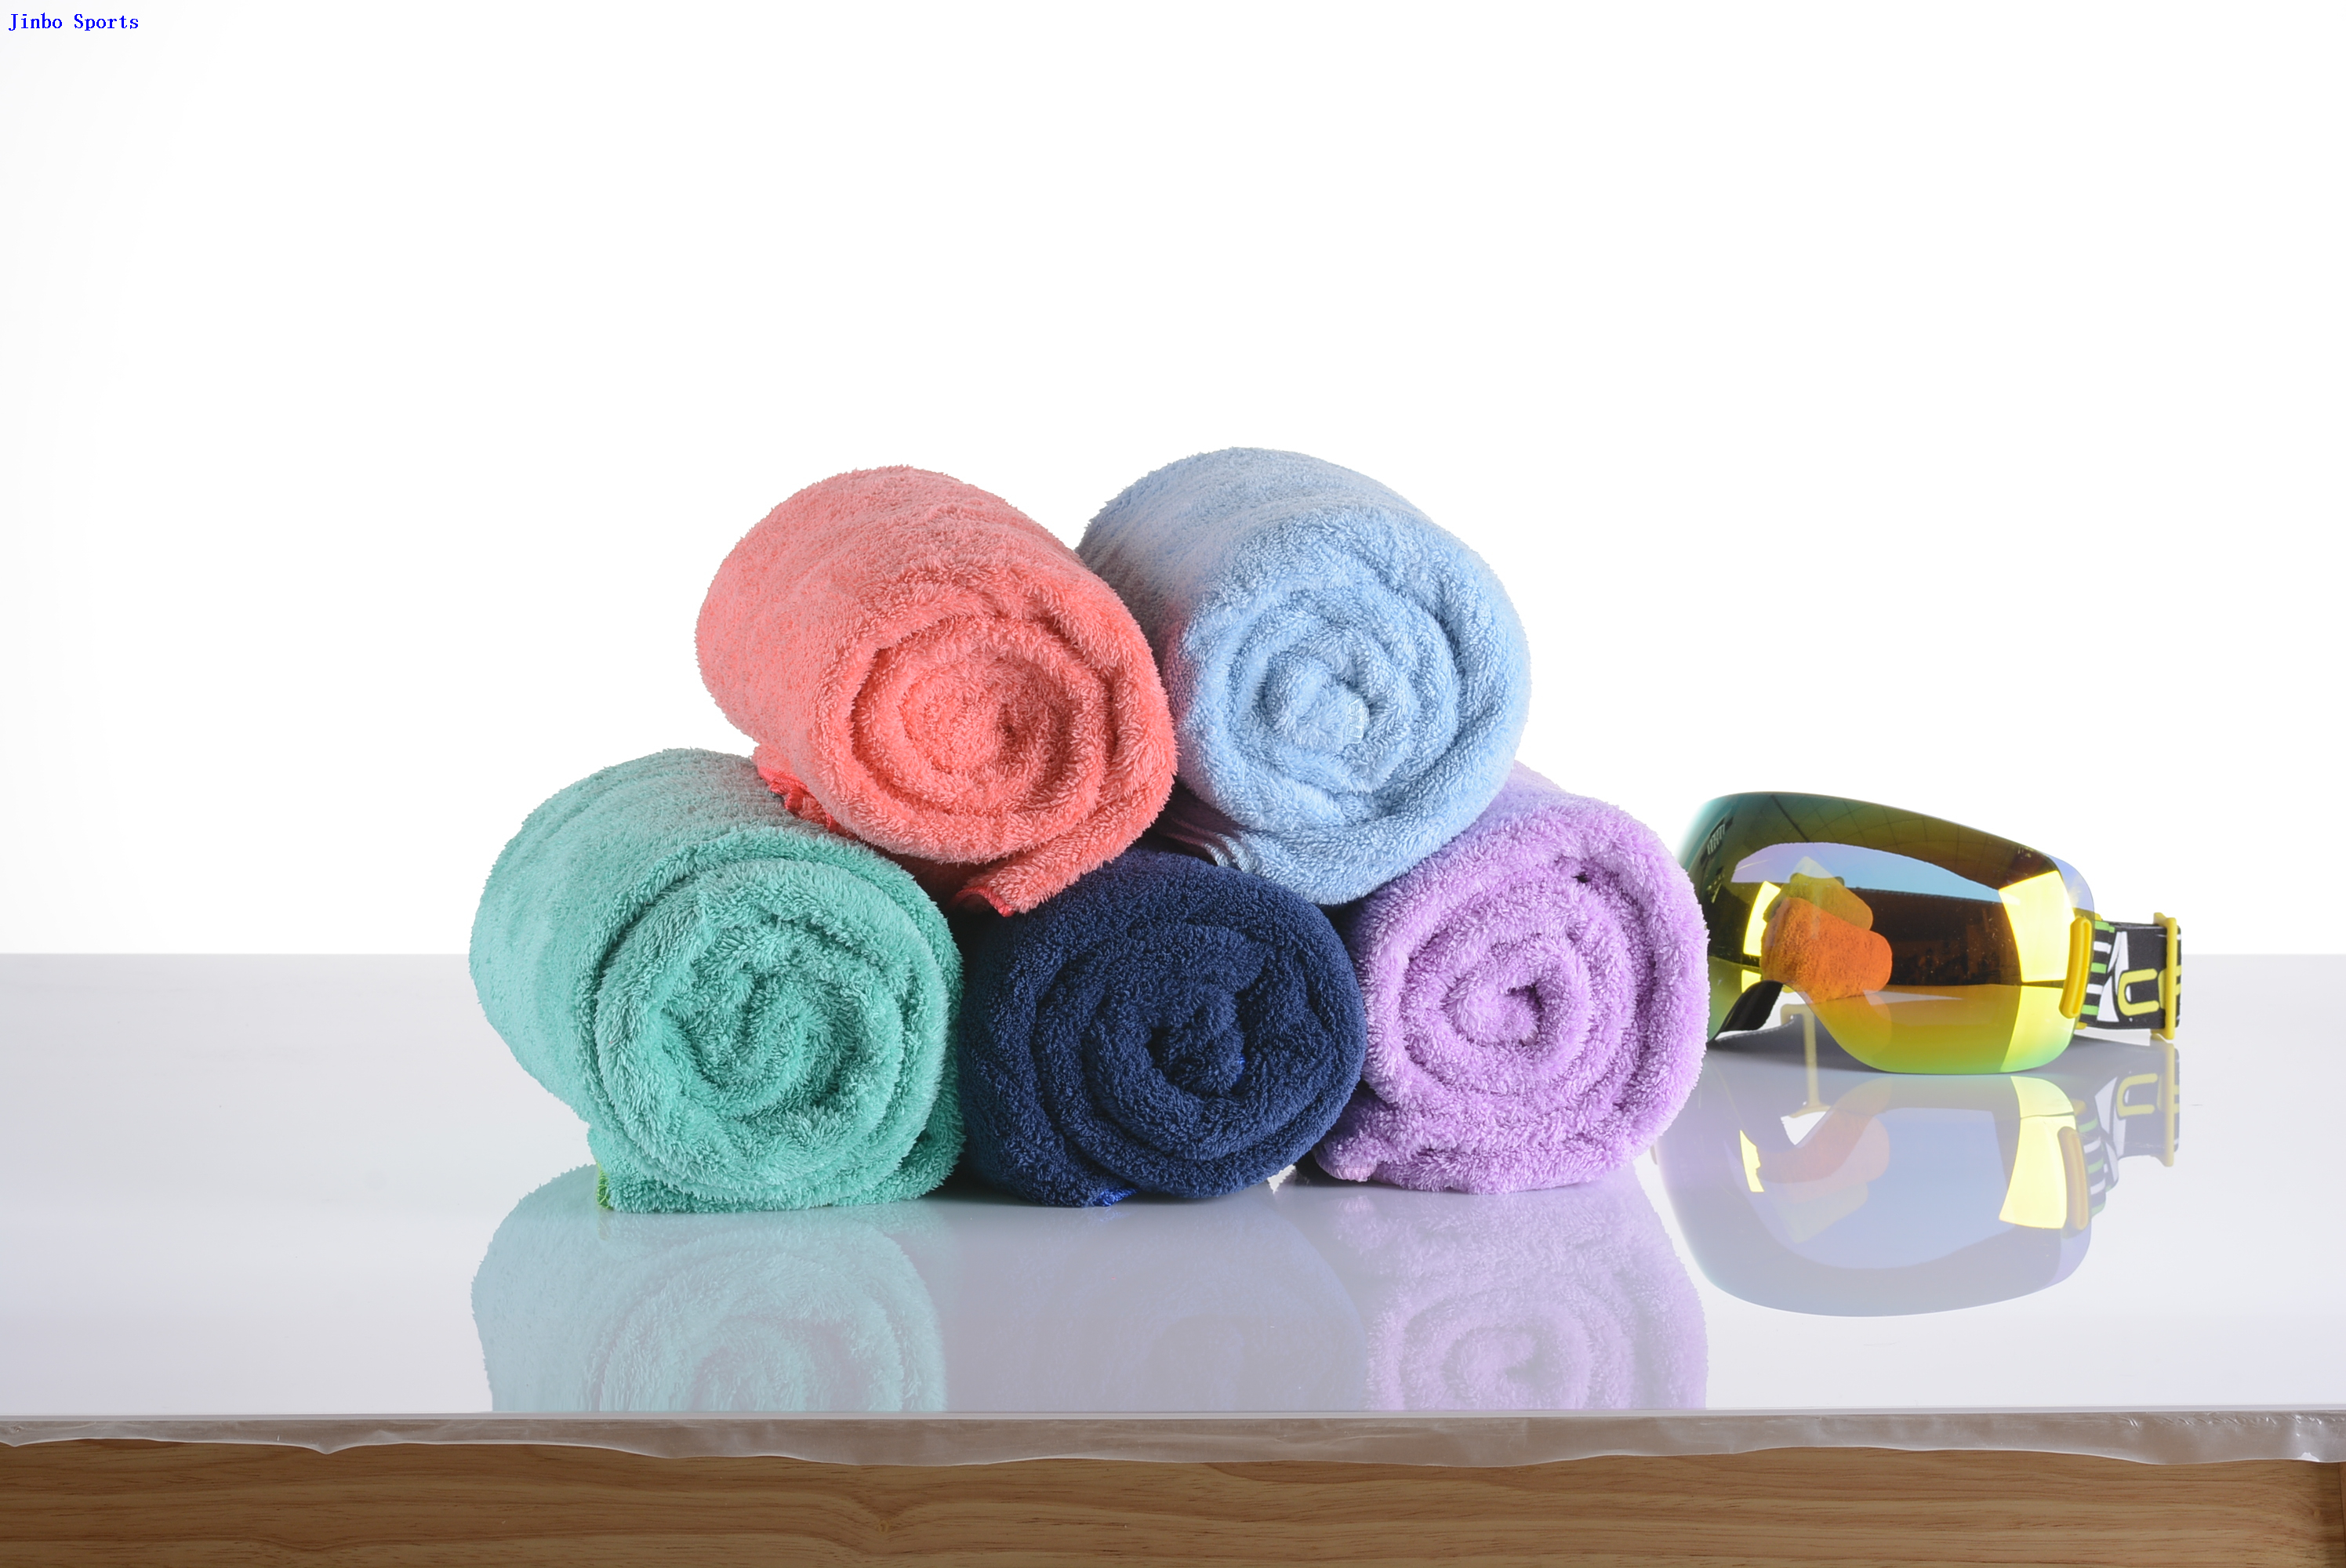 Coral Velvet Microfiber Beauty Towel Very Soft And Comfortable Strong Water Absorption for Facial Or Body